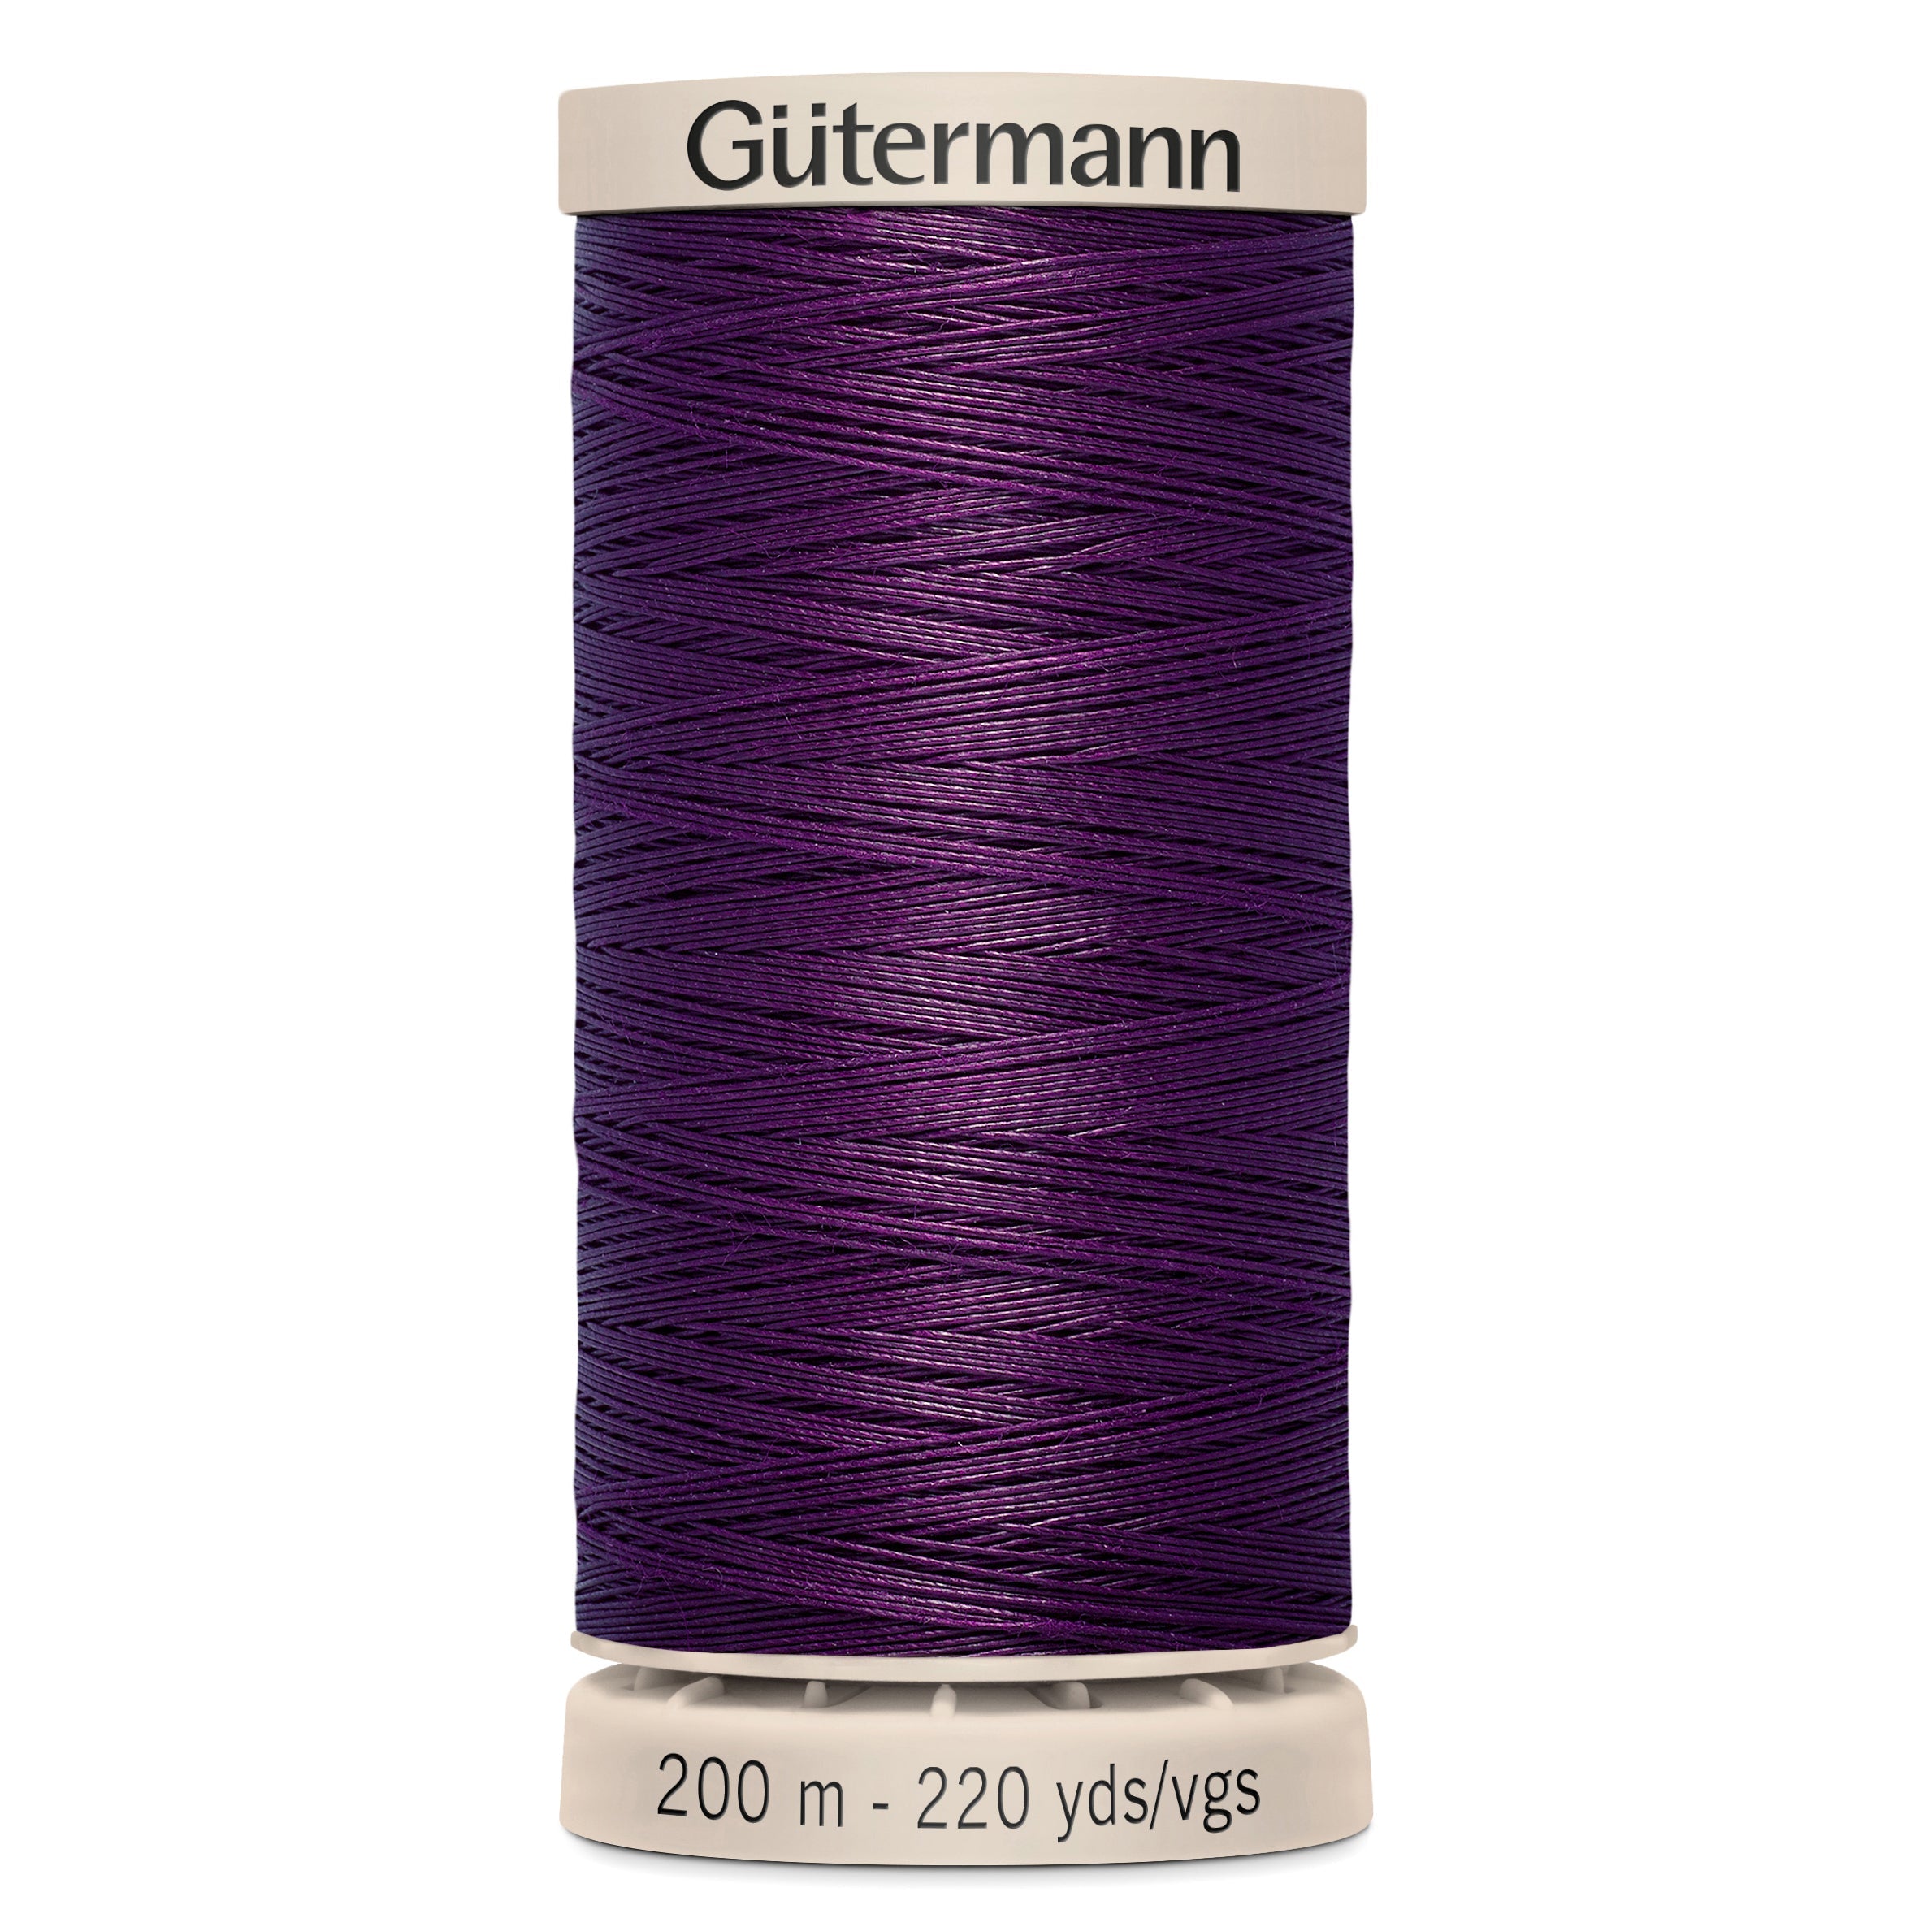 Gutermann Hand Quilting Cotton - 3832 from Jaycotts Sewing Supplies